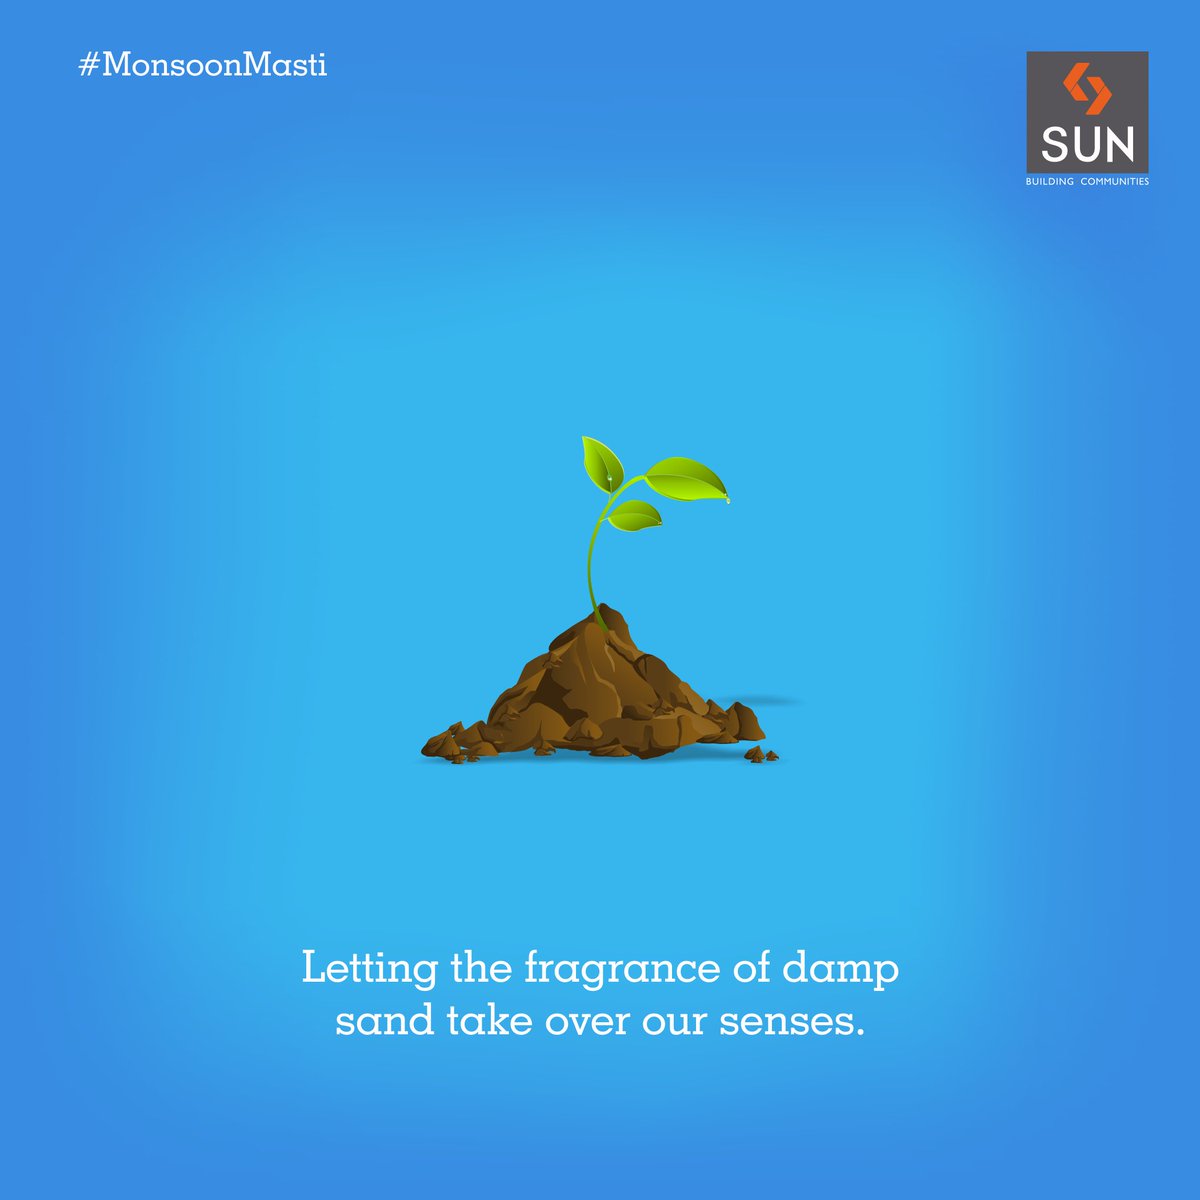 #MonsoonMasti
The smell of damp sand after rains is perhaps one of the best fragrances in the world. https://t.co/6hRhYyCxQ9